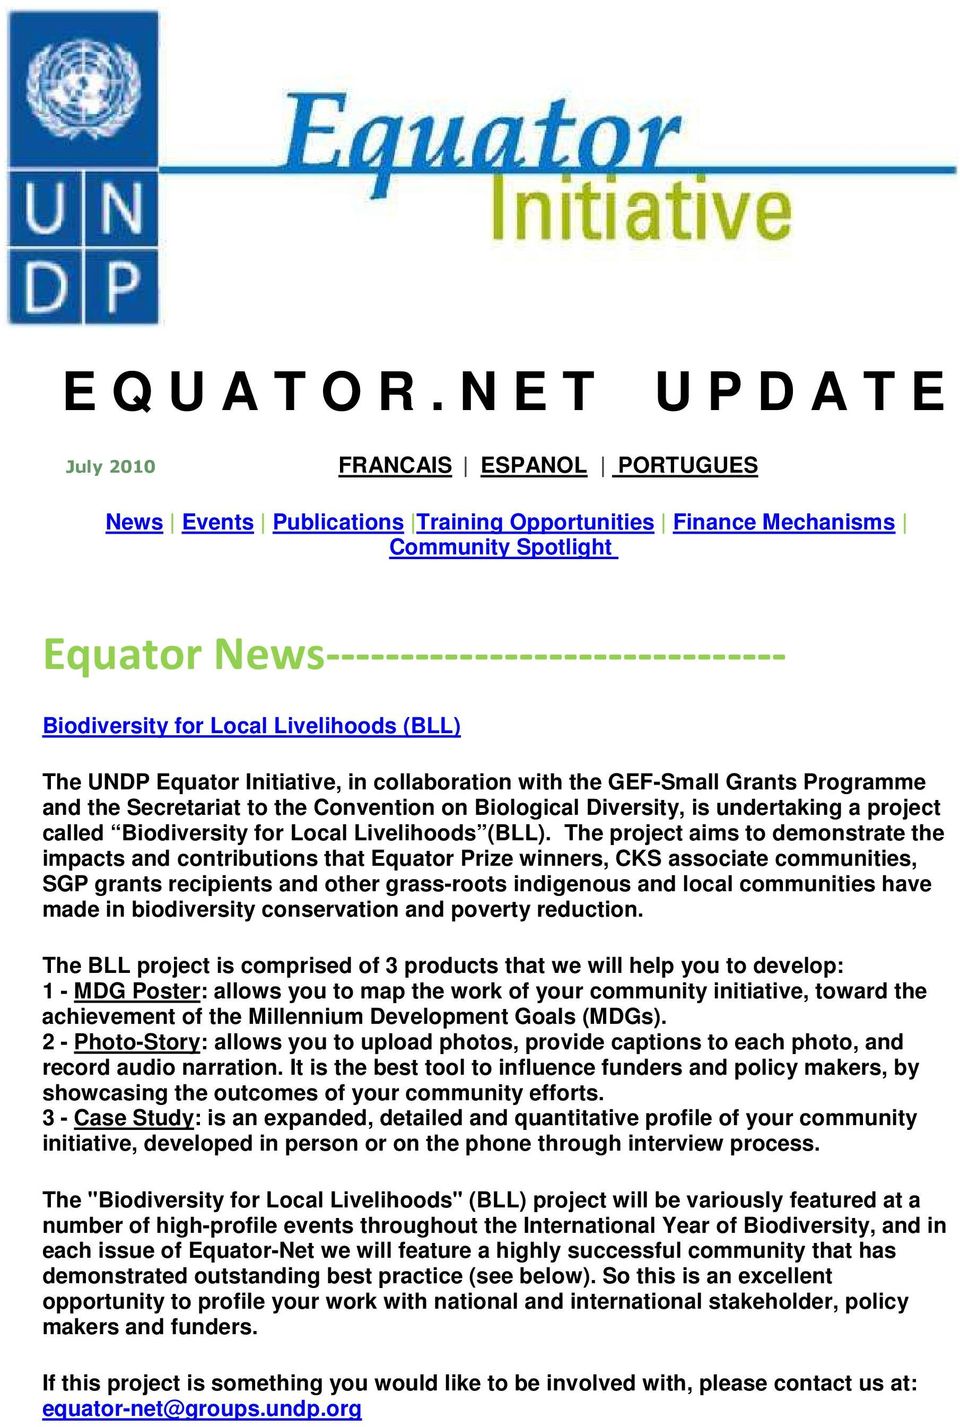 Biodiversity for Local Livelihoods (BLL) The UNDP Equator Initiative, in collaboration with the GEF-Small Grants Programme and the Secretariat to the Convention on Biological Diversity, is